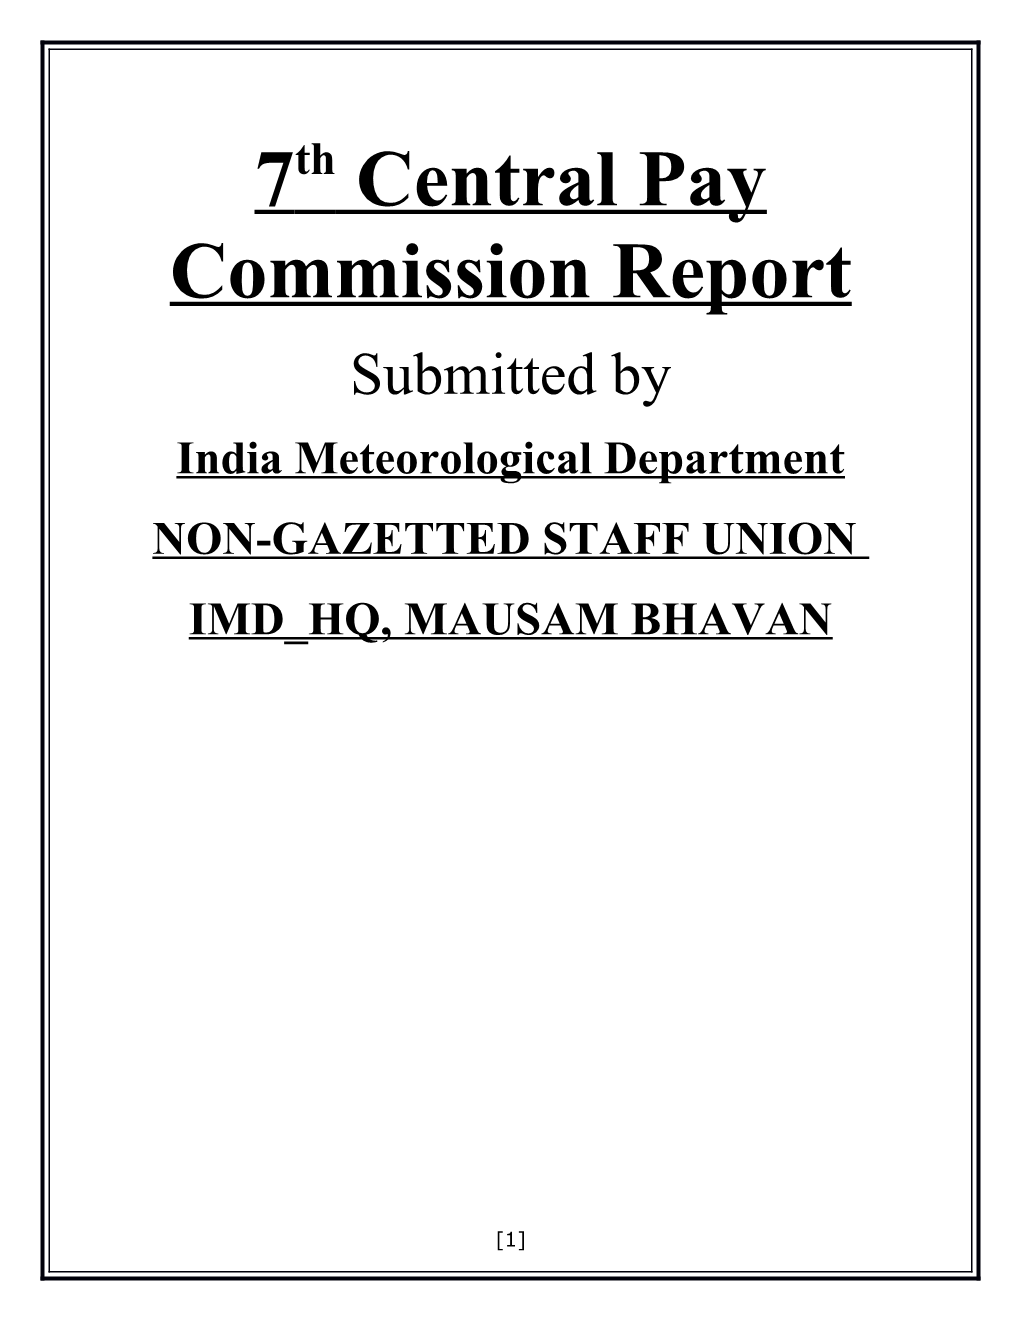 7Th Central Pay Commission Report